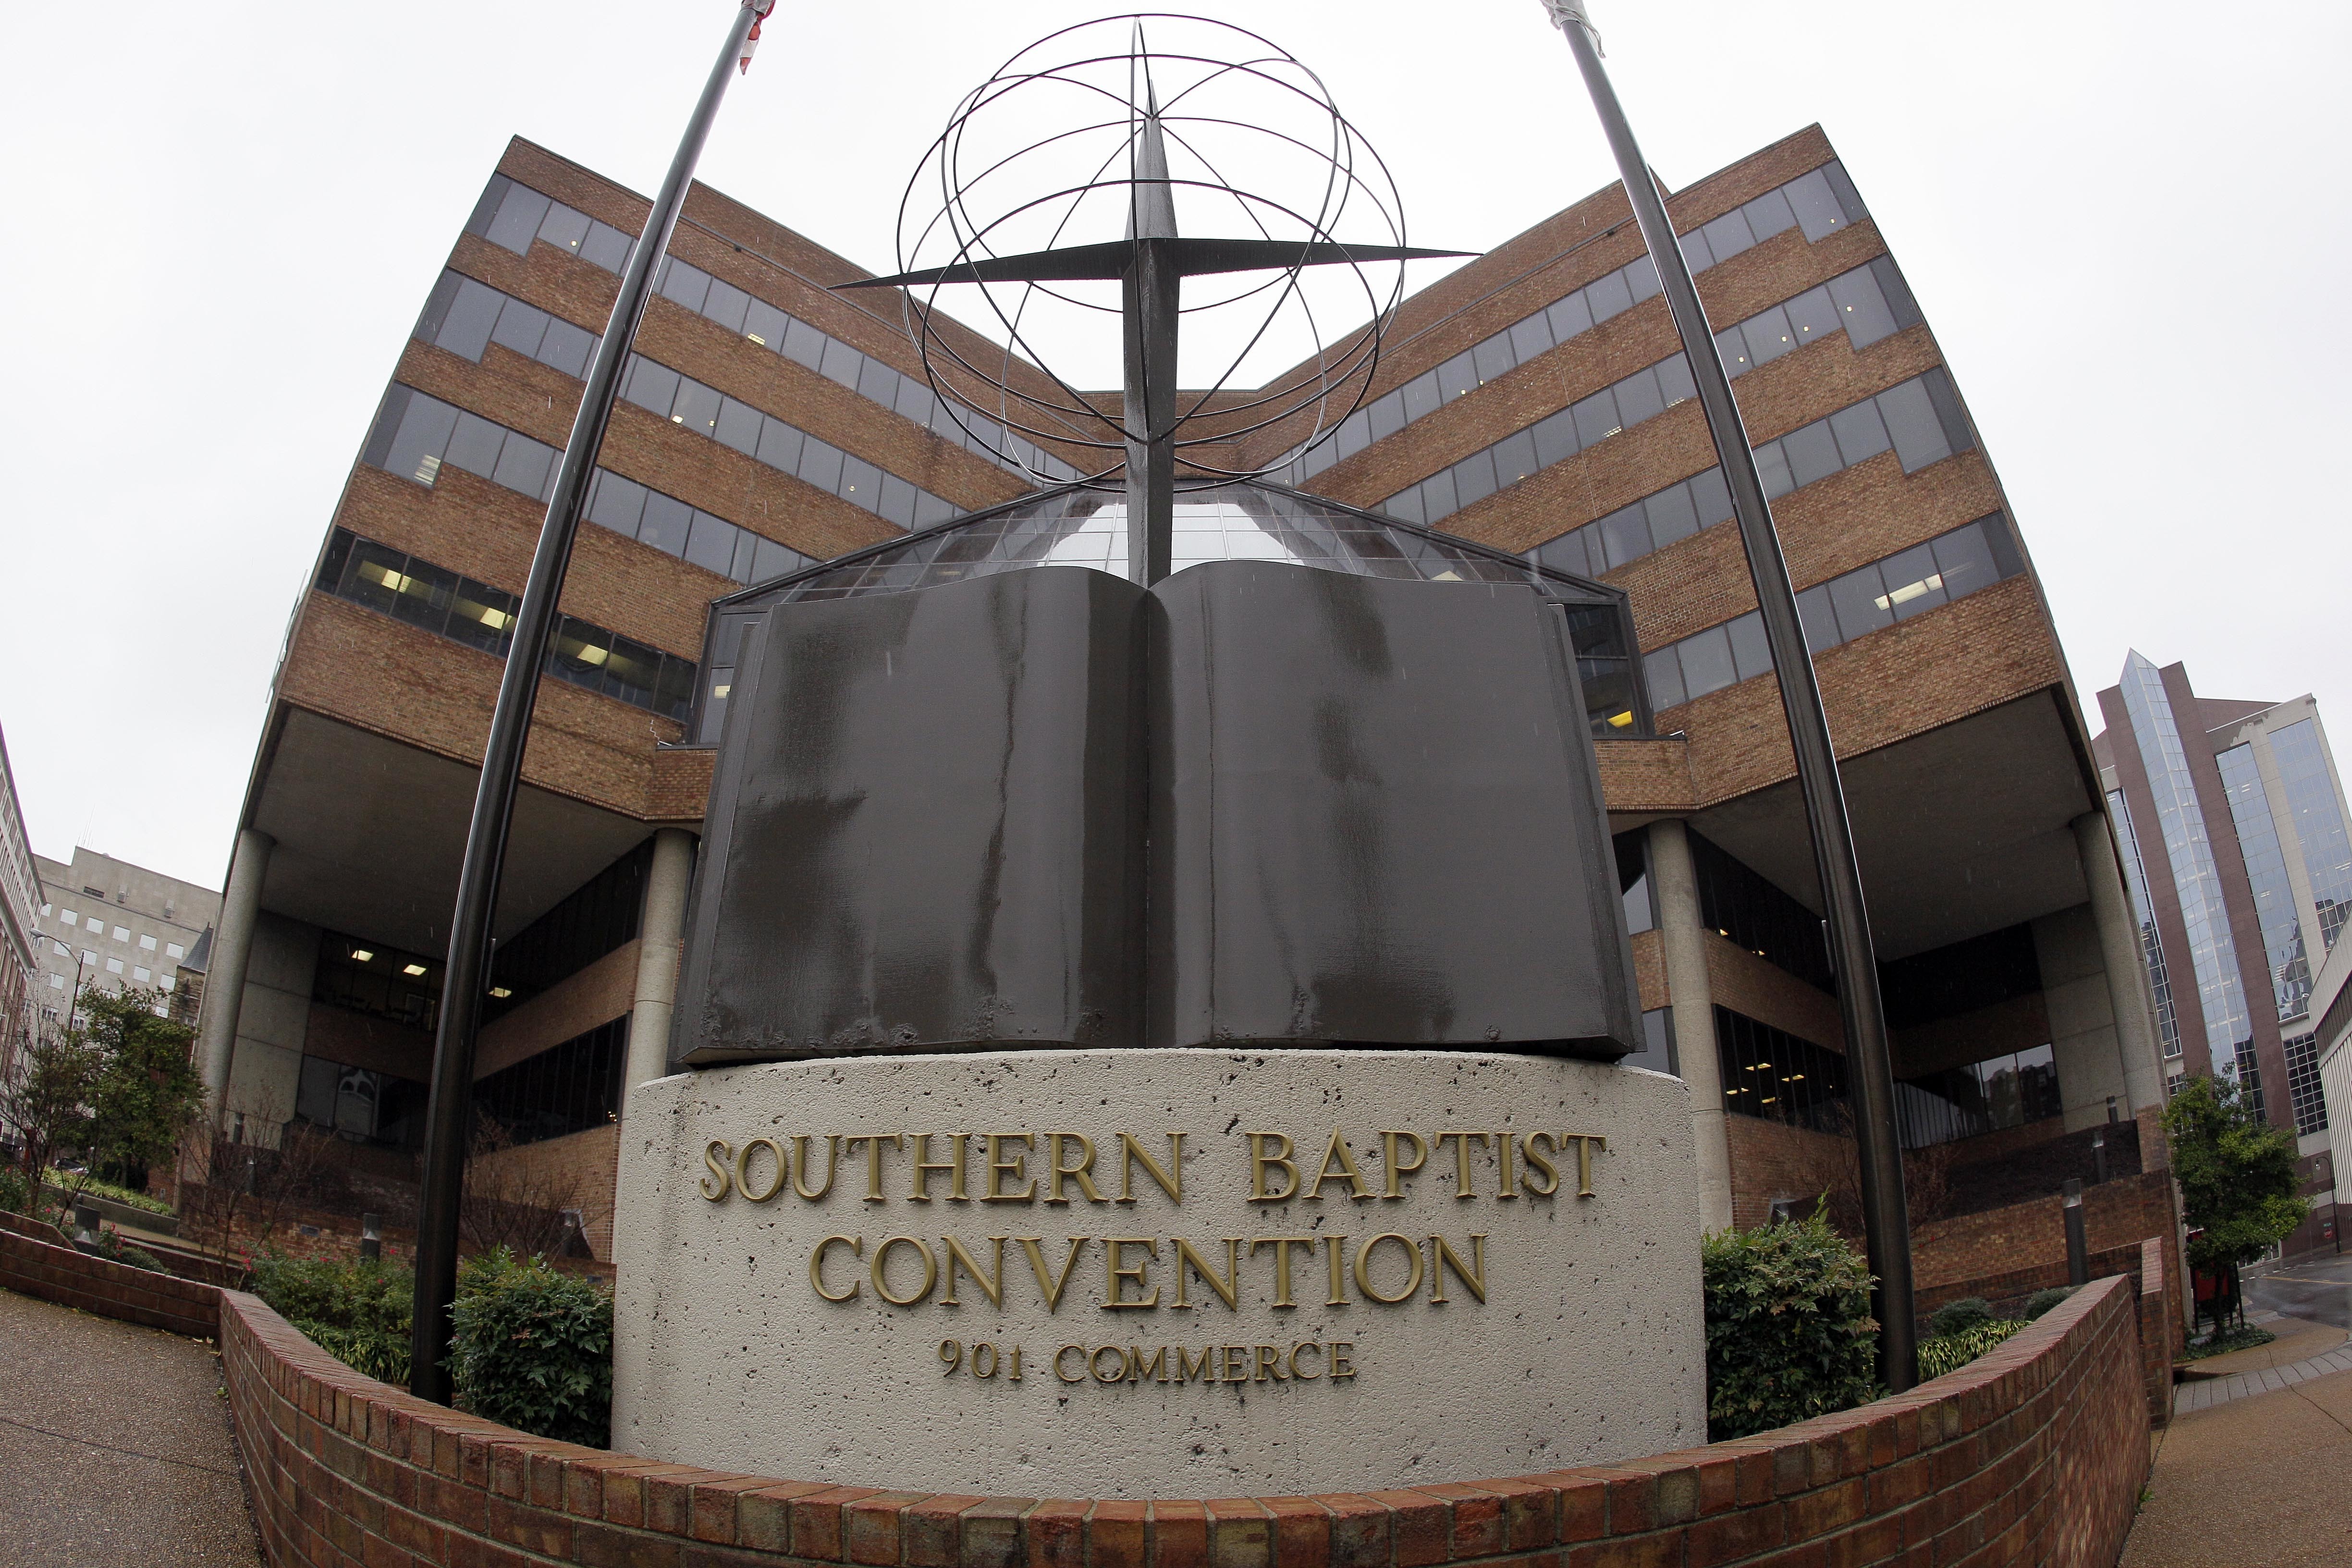 Southern Baptist Convention headquarters